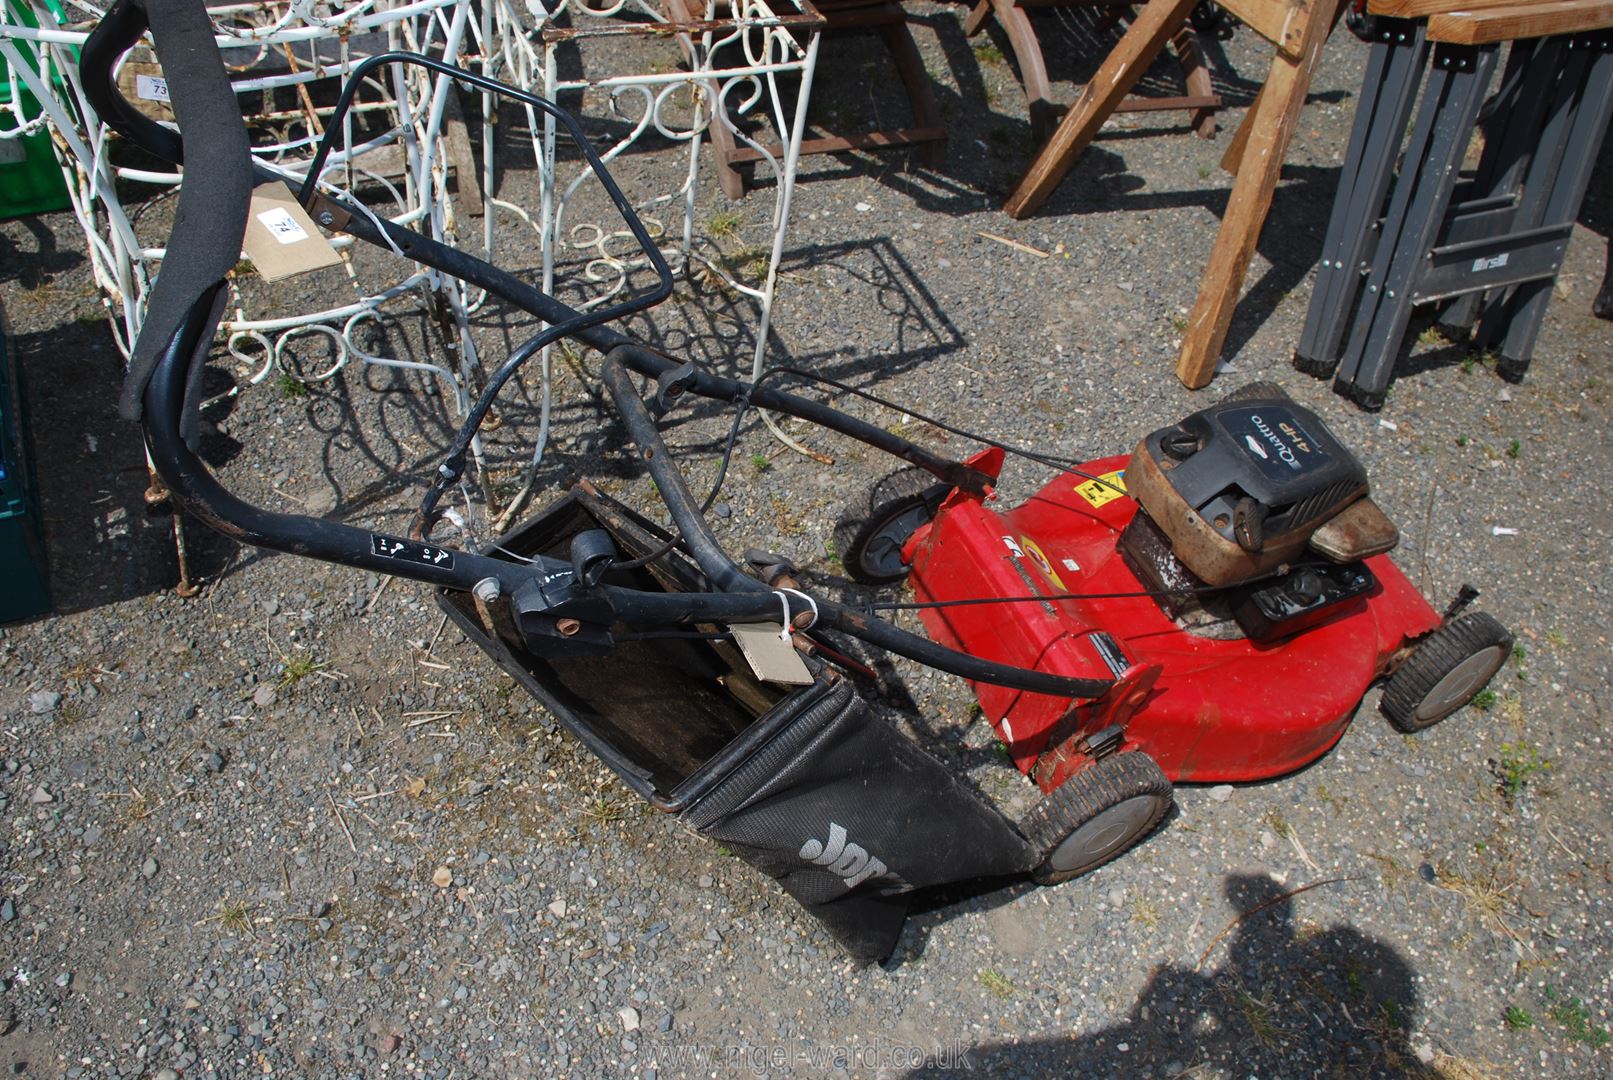 A Jonsered Boor brakes and Stratton Quattro 4HP lawn mower and bag.